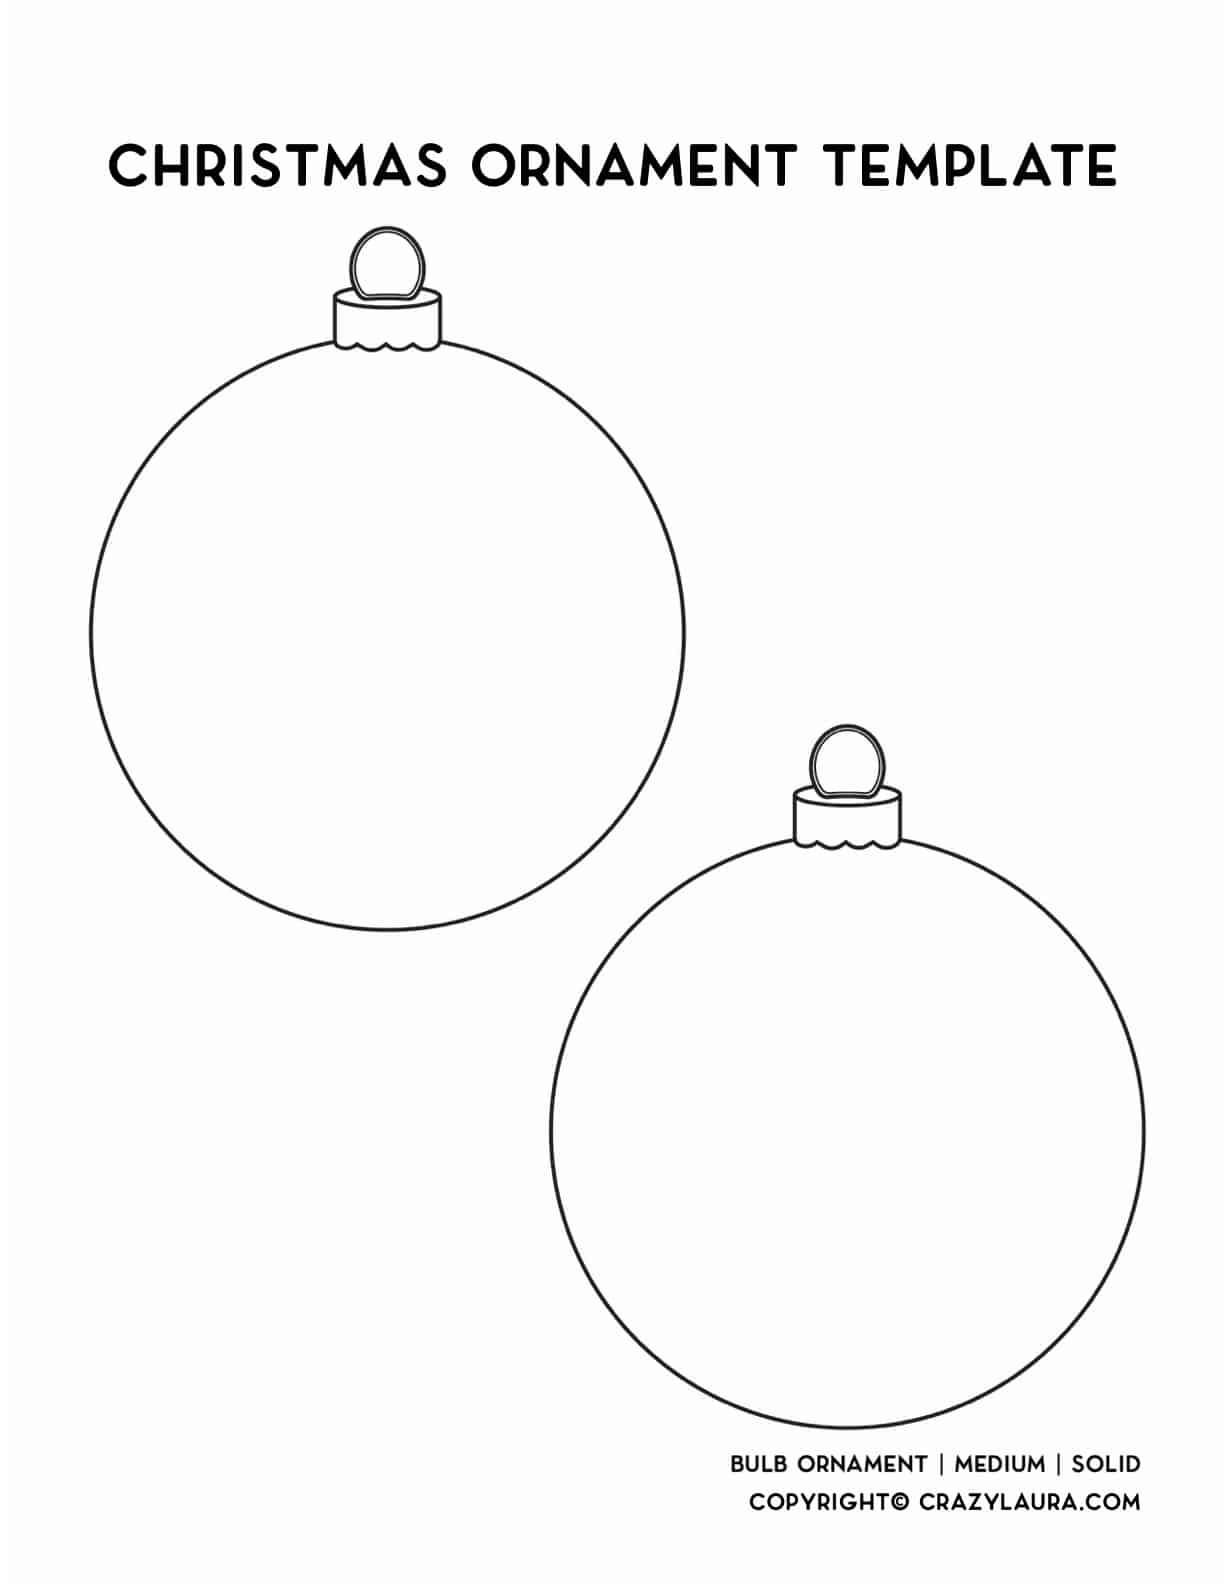 free-christmas-ornament-template-printables-outlines-crazy-laura